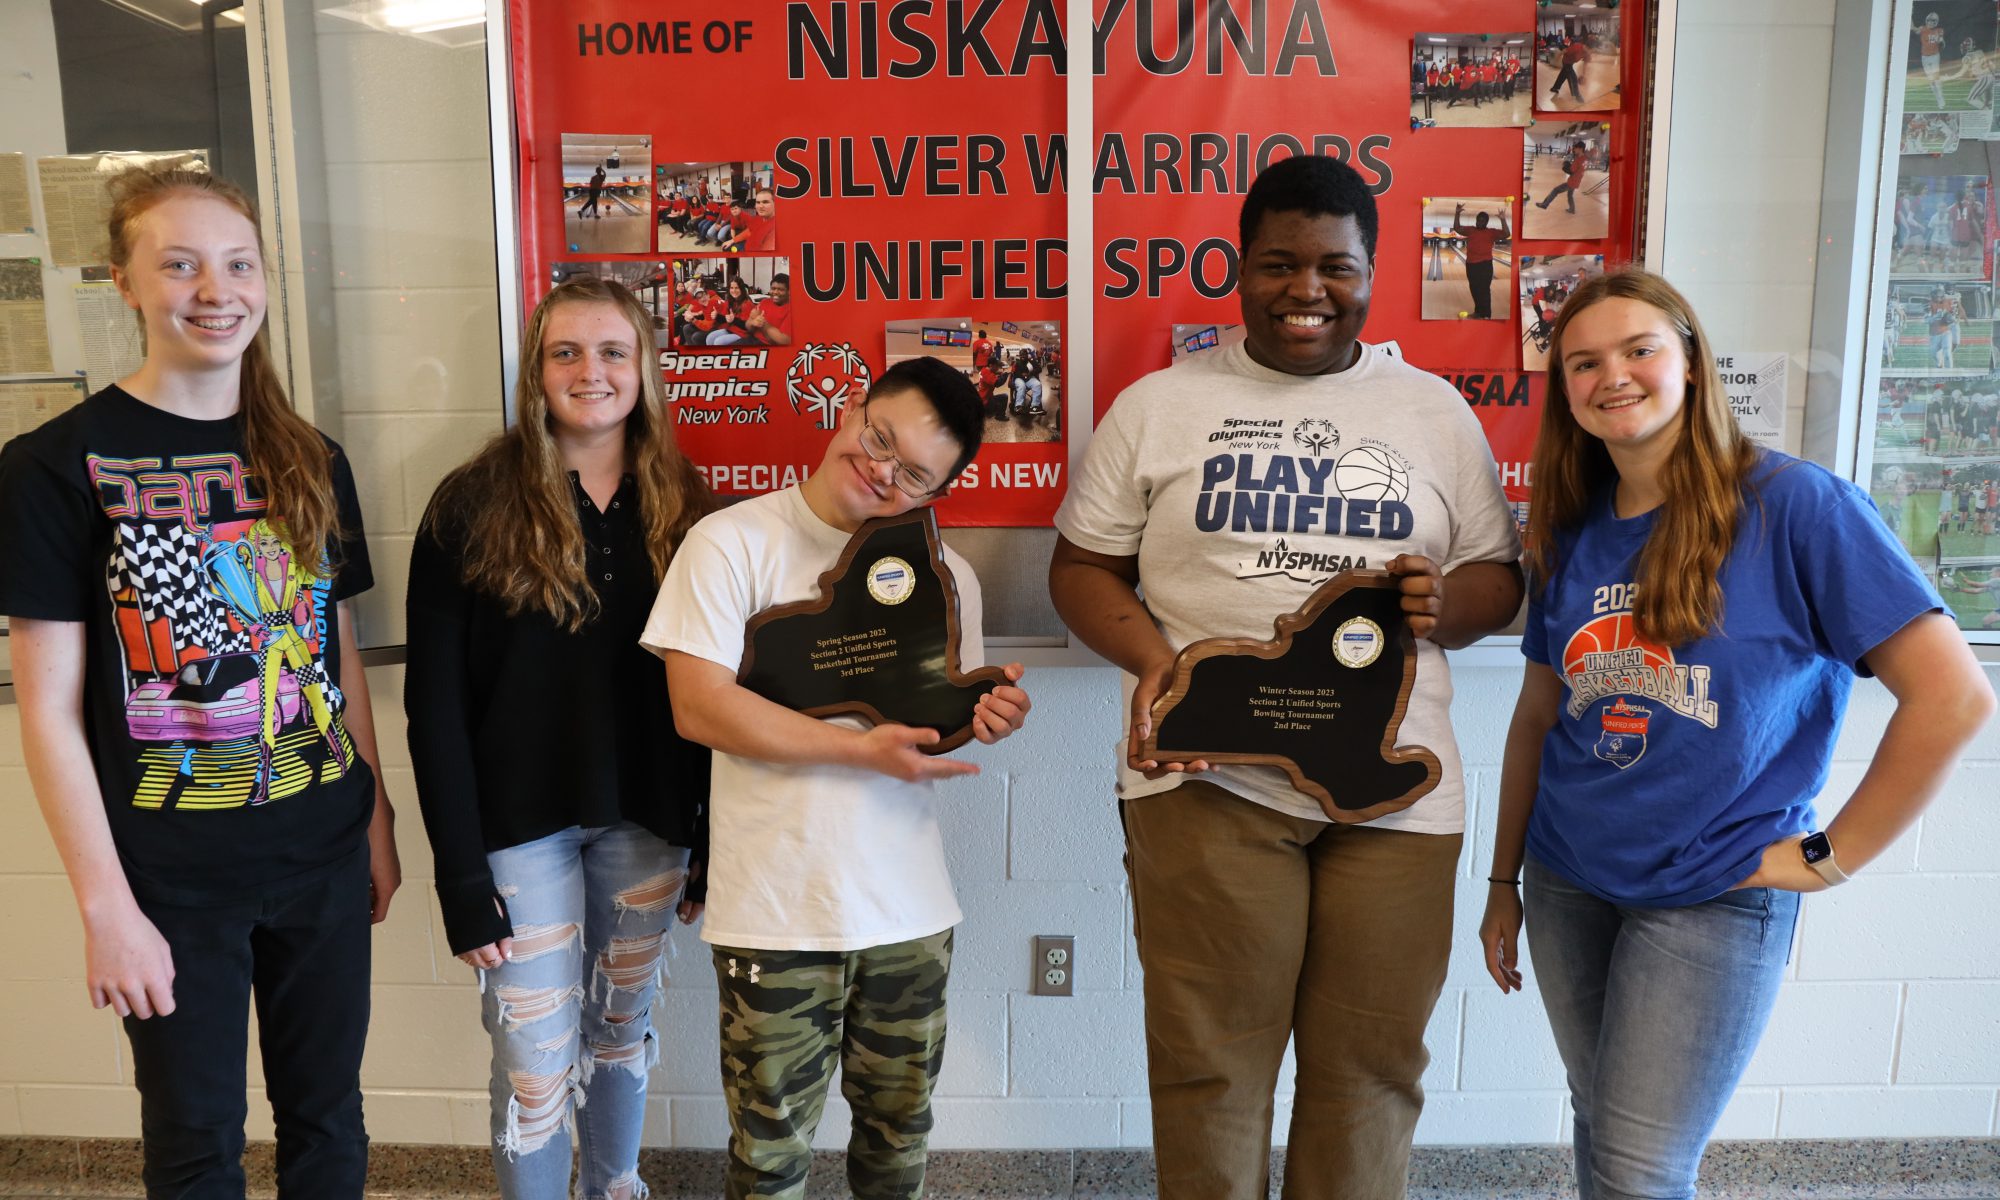 Unified sports teammates pose with plaques.